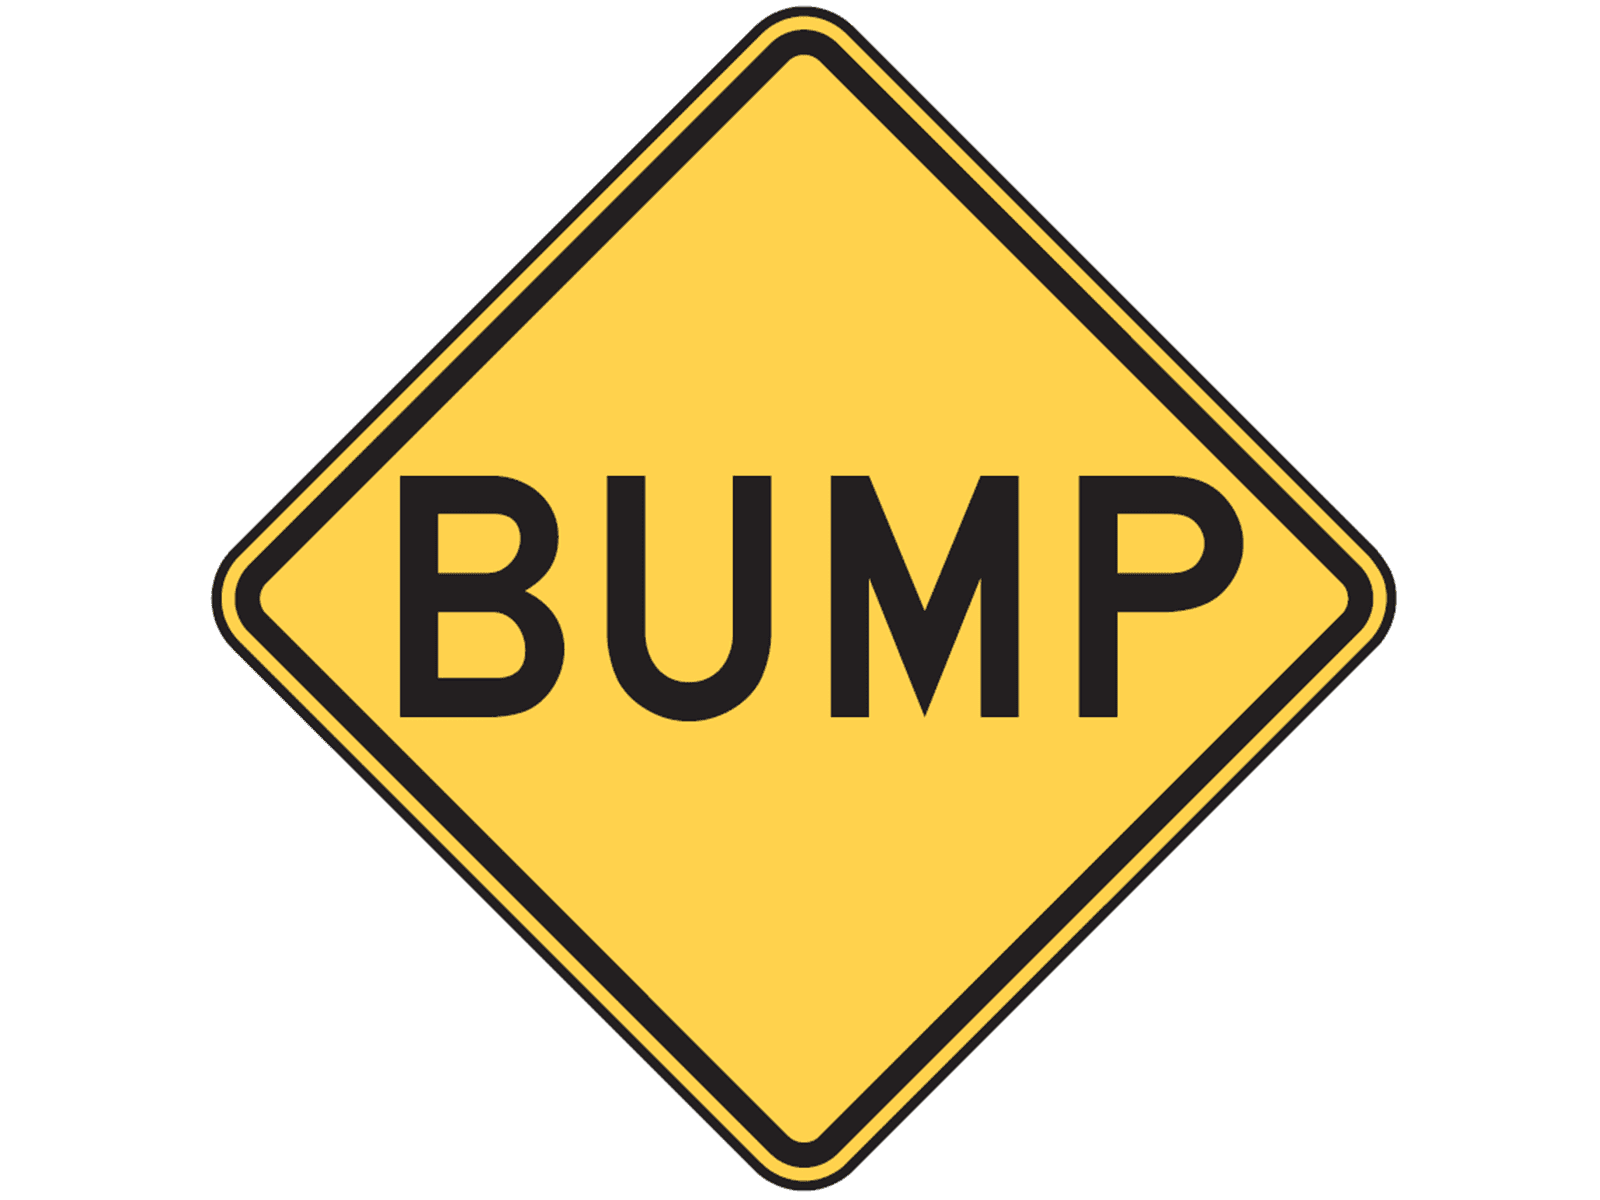 BUMP W8-1 - W8: Pavement and Roadway Conditions